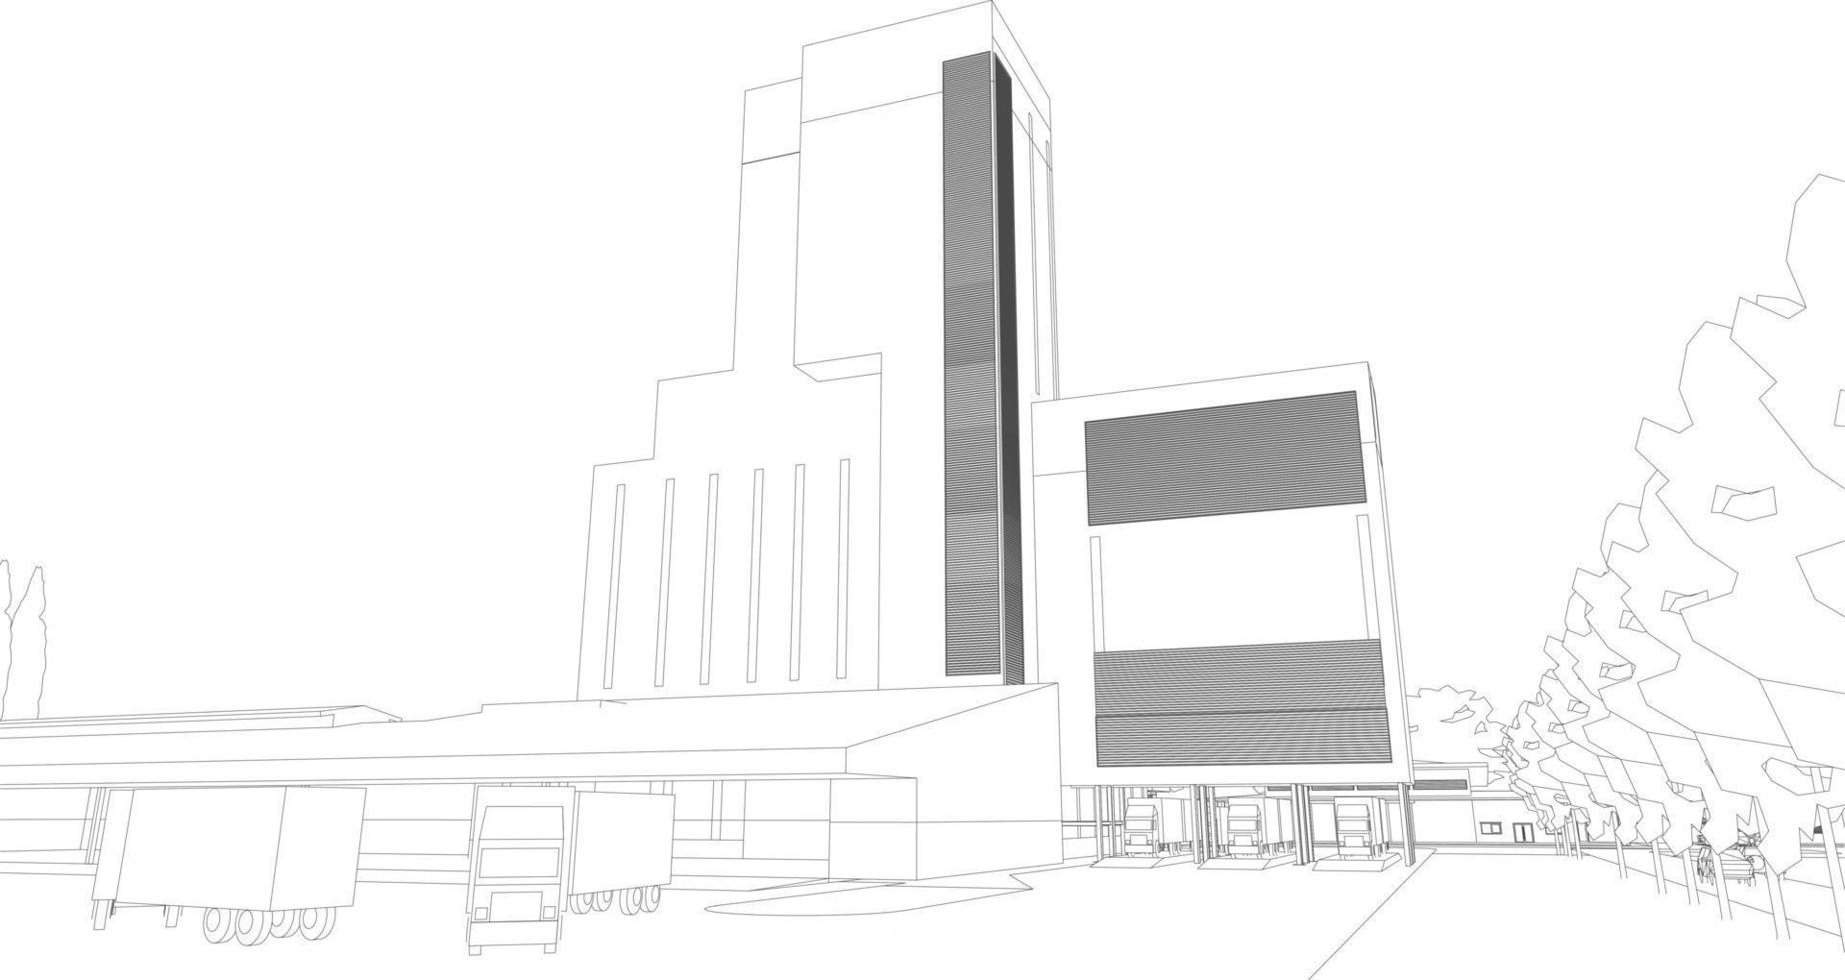 3D illustration of building project vector